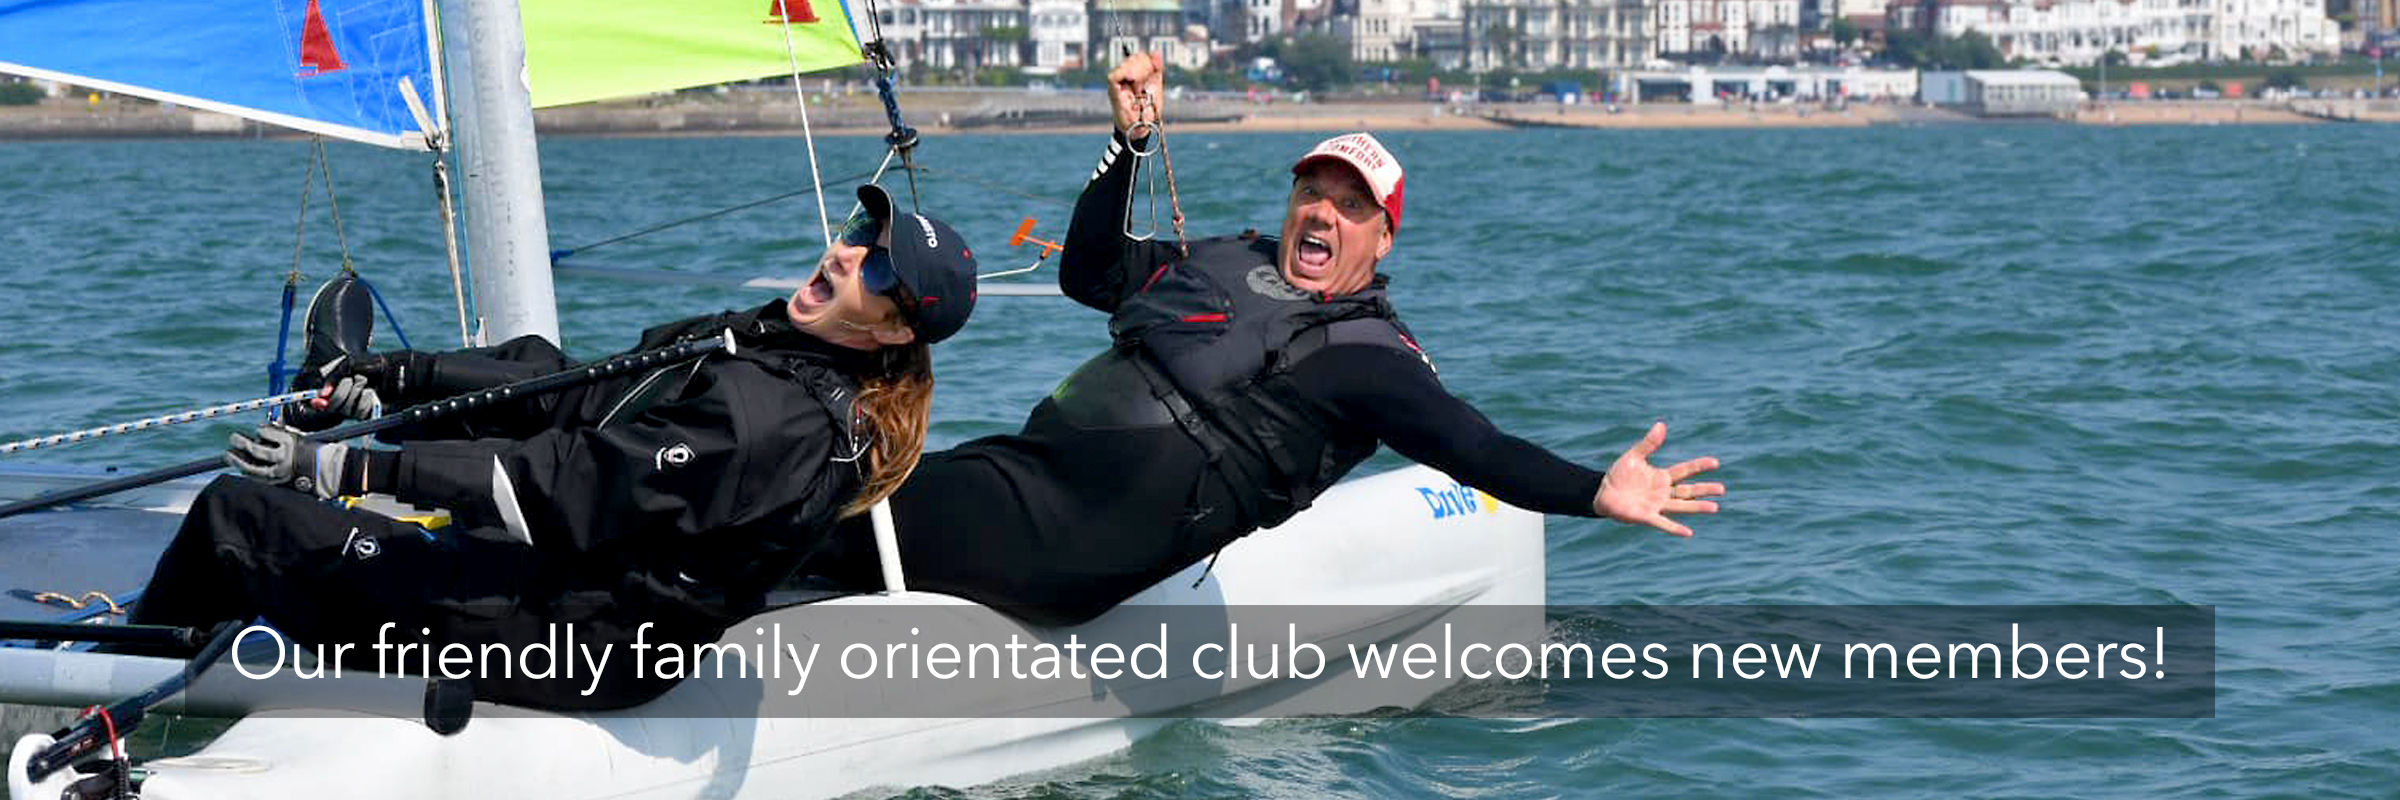 Permalink to:Our friendly family orientated club in Southend welcomes new members